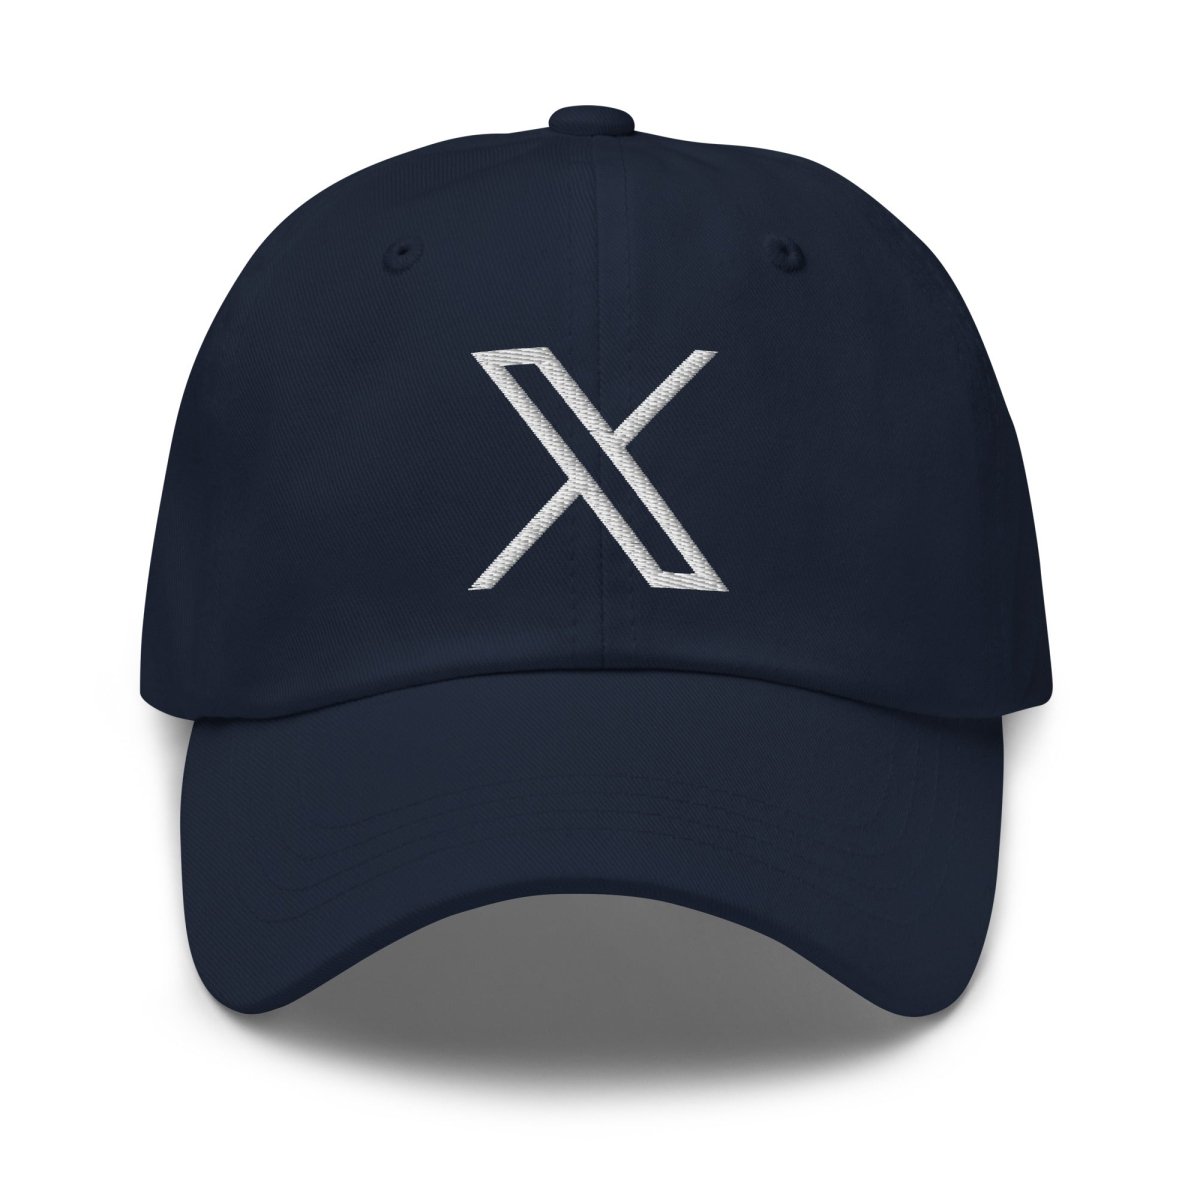 Twitter X Logo Embroidered Cap - Navy - AI Store